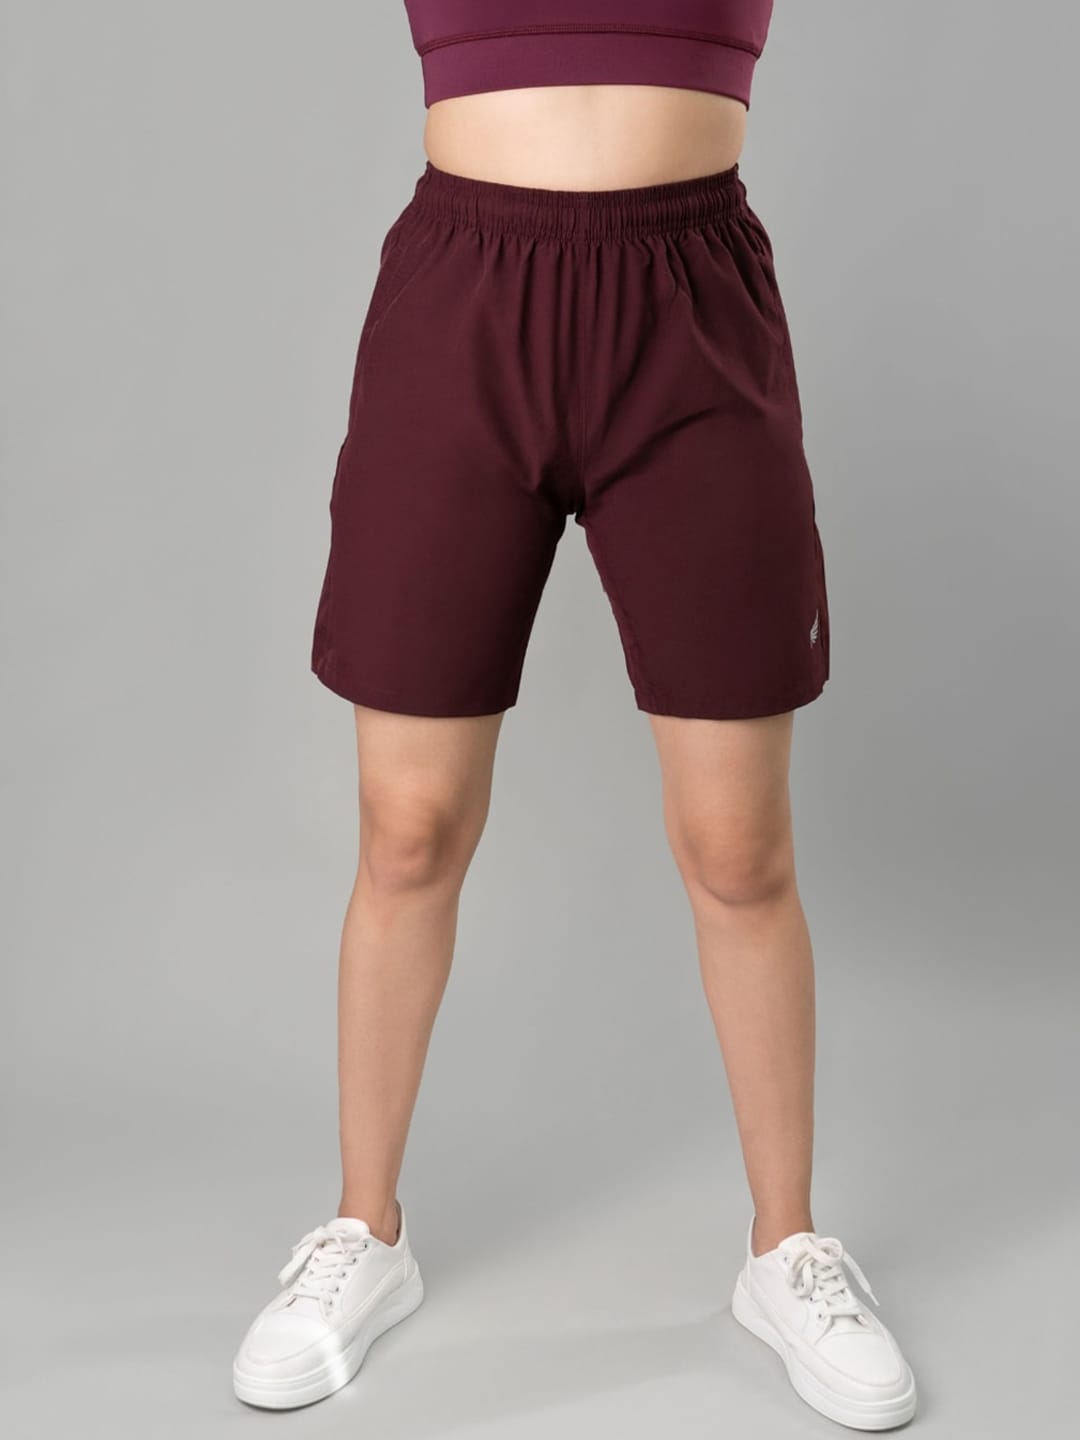 FLURR Women Mid-Rise Sports Shorts Price in India